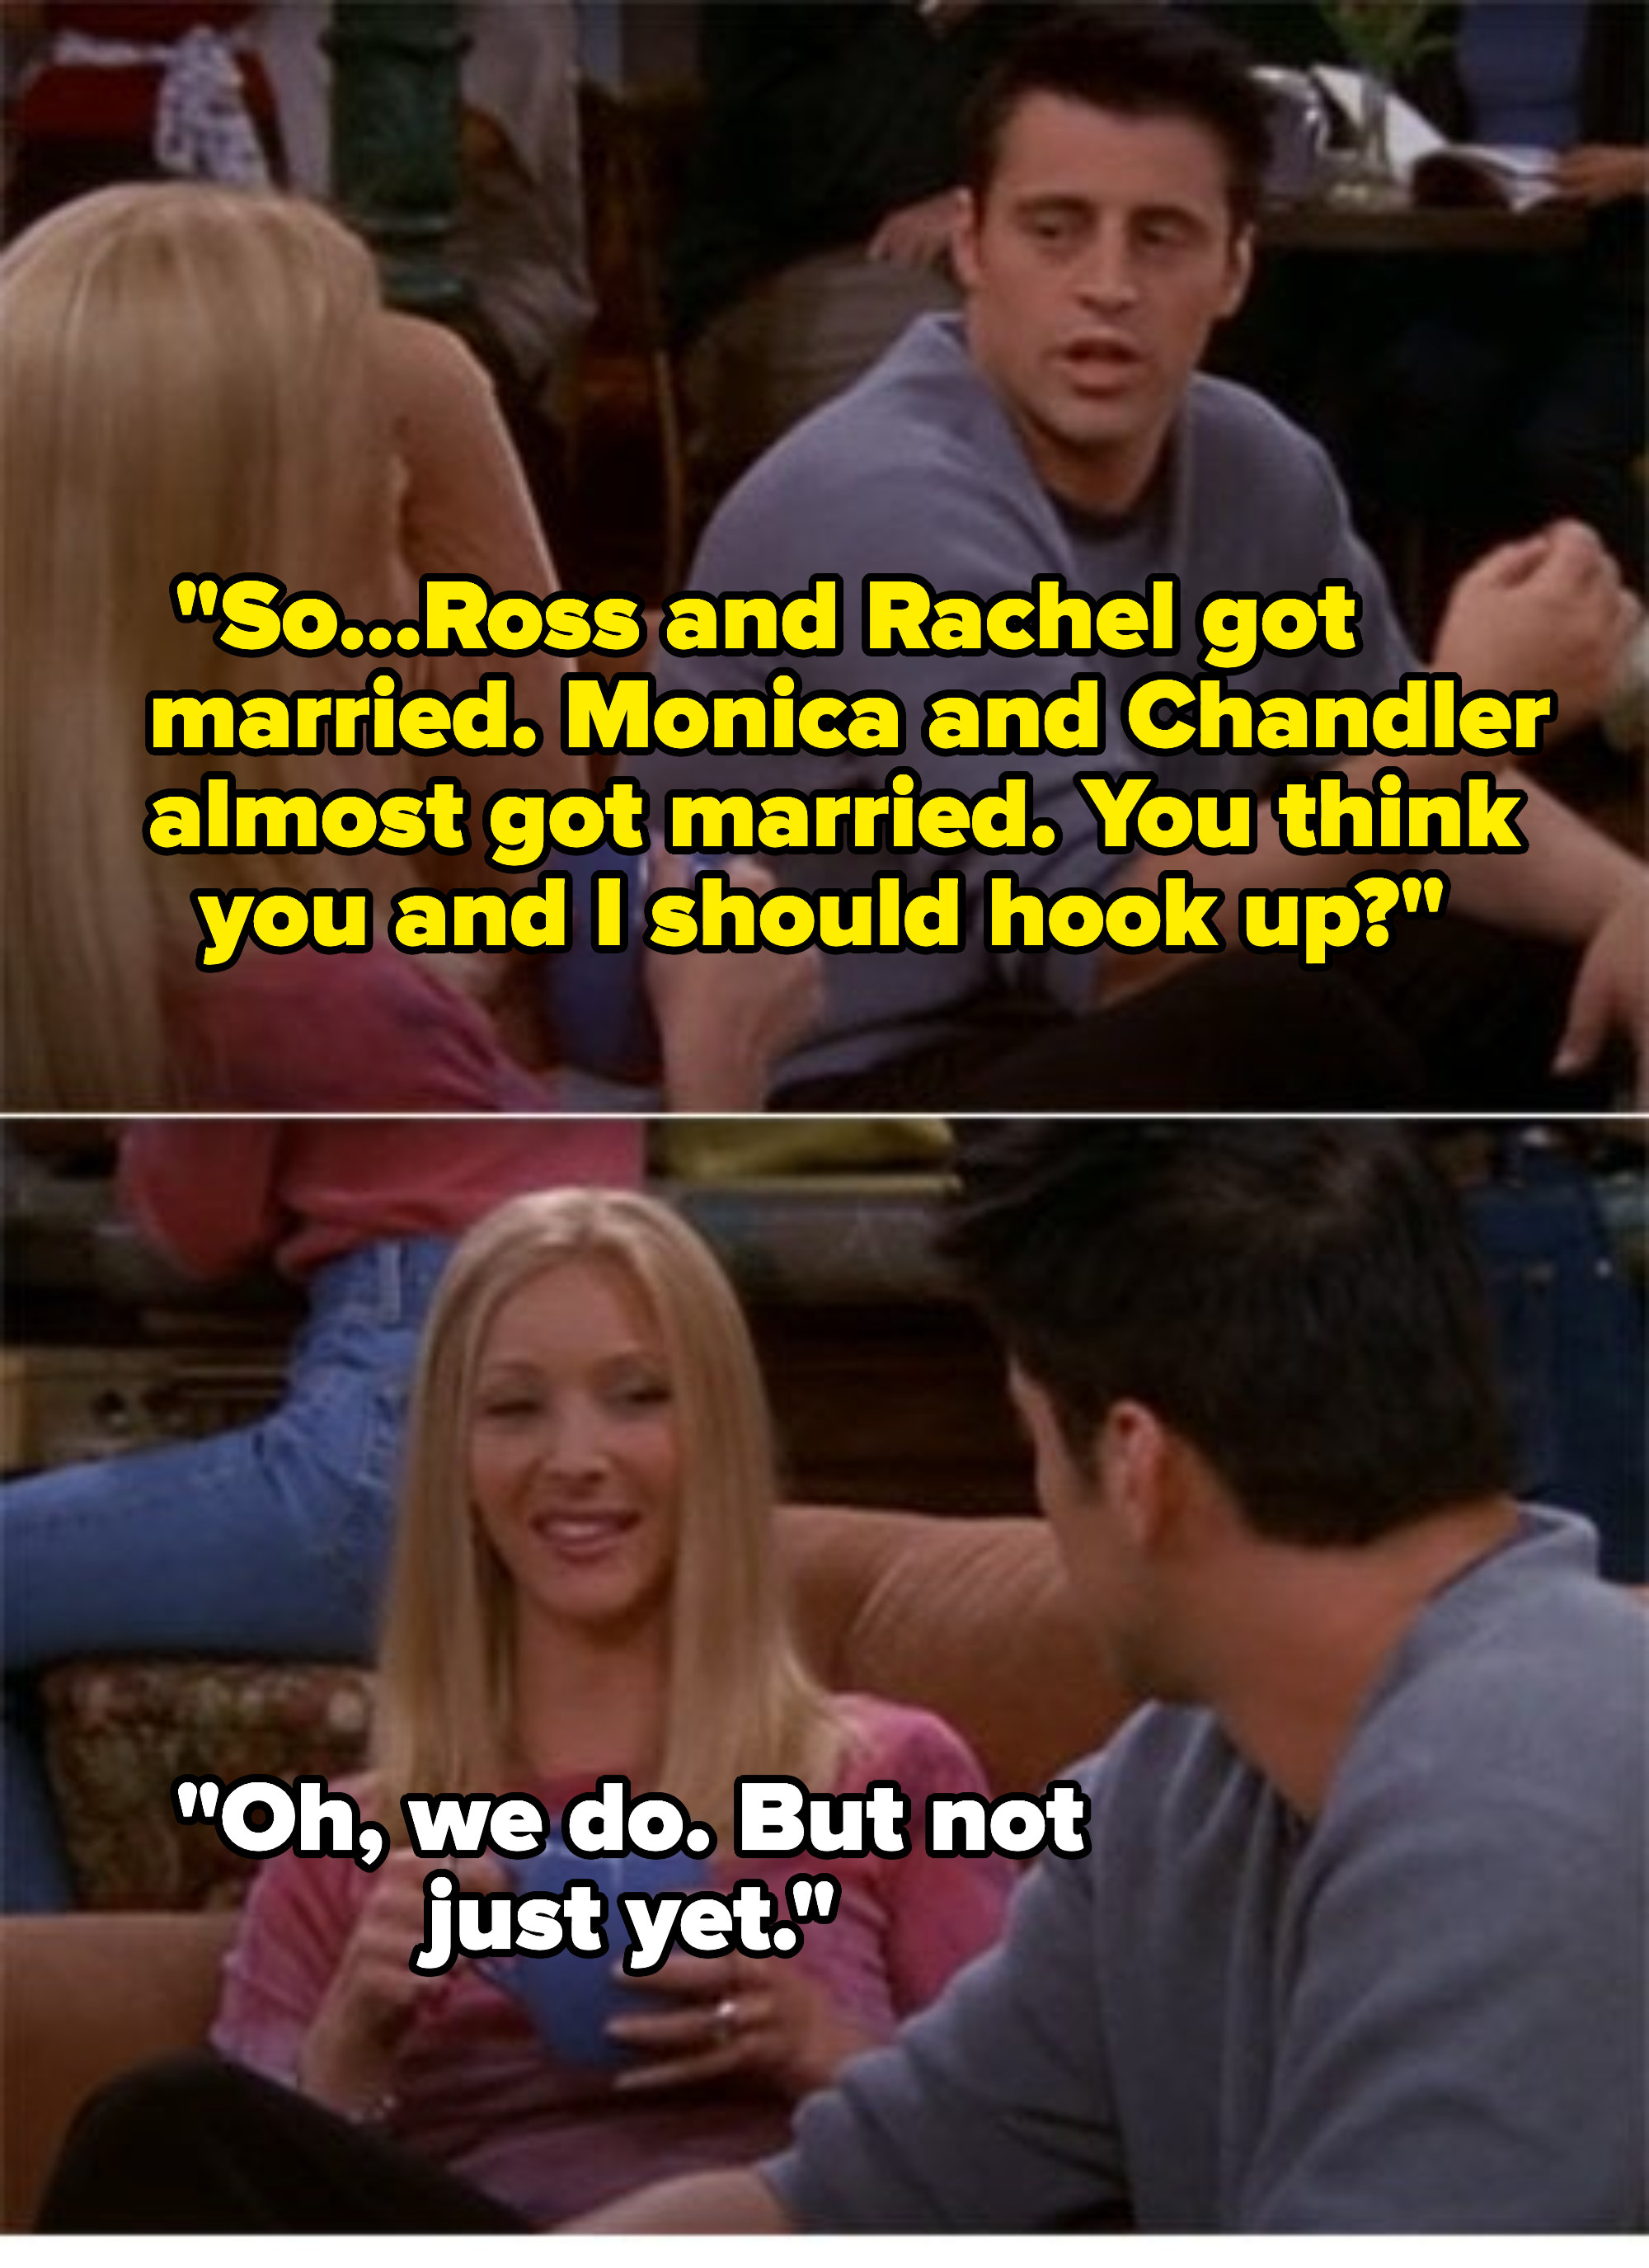 Joey asking Phoebe if they should hook up and her saying &quot;not just yet&quot;